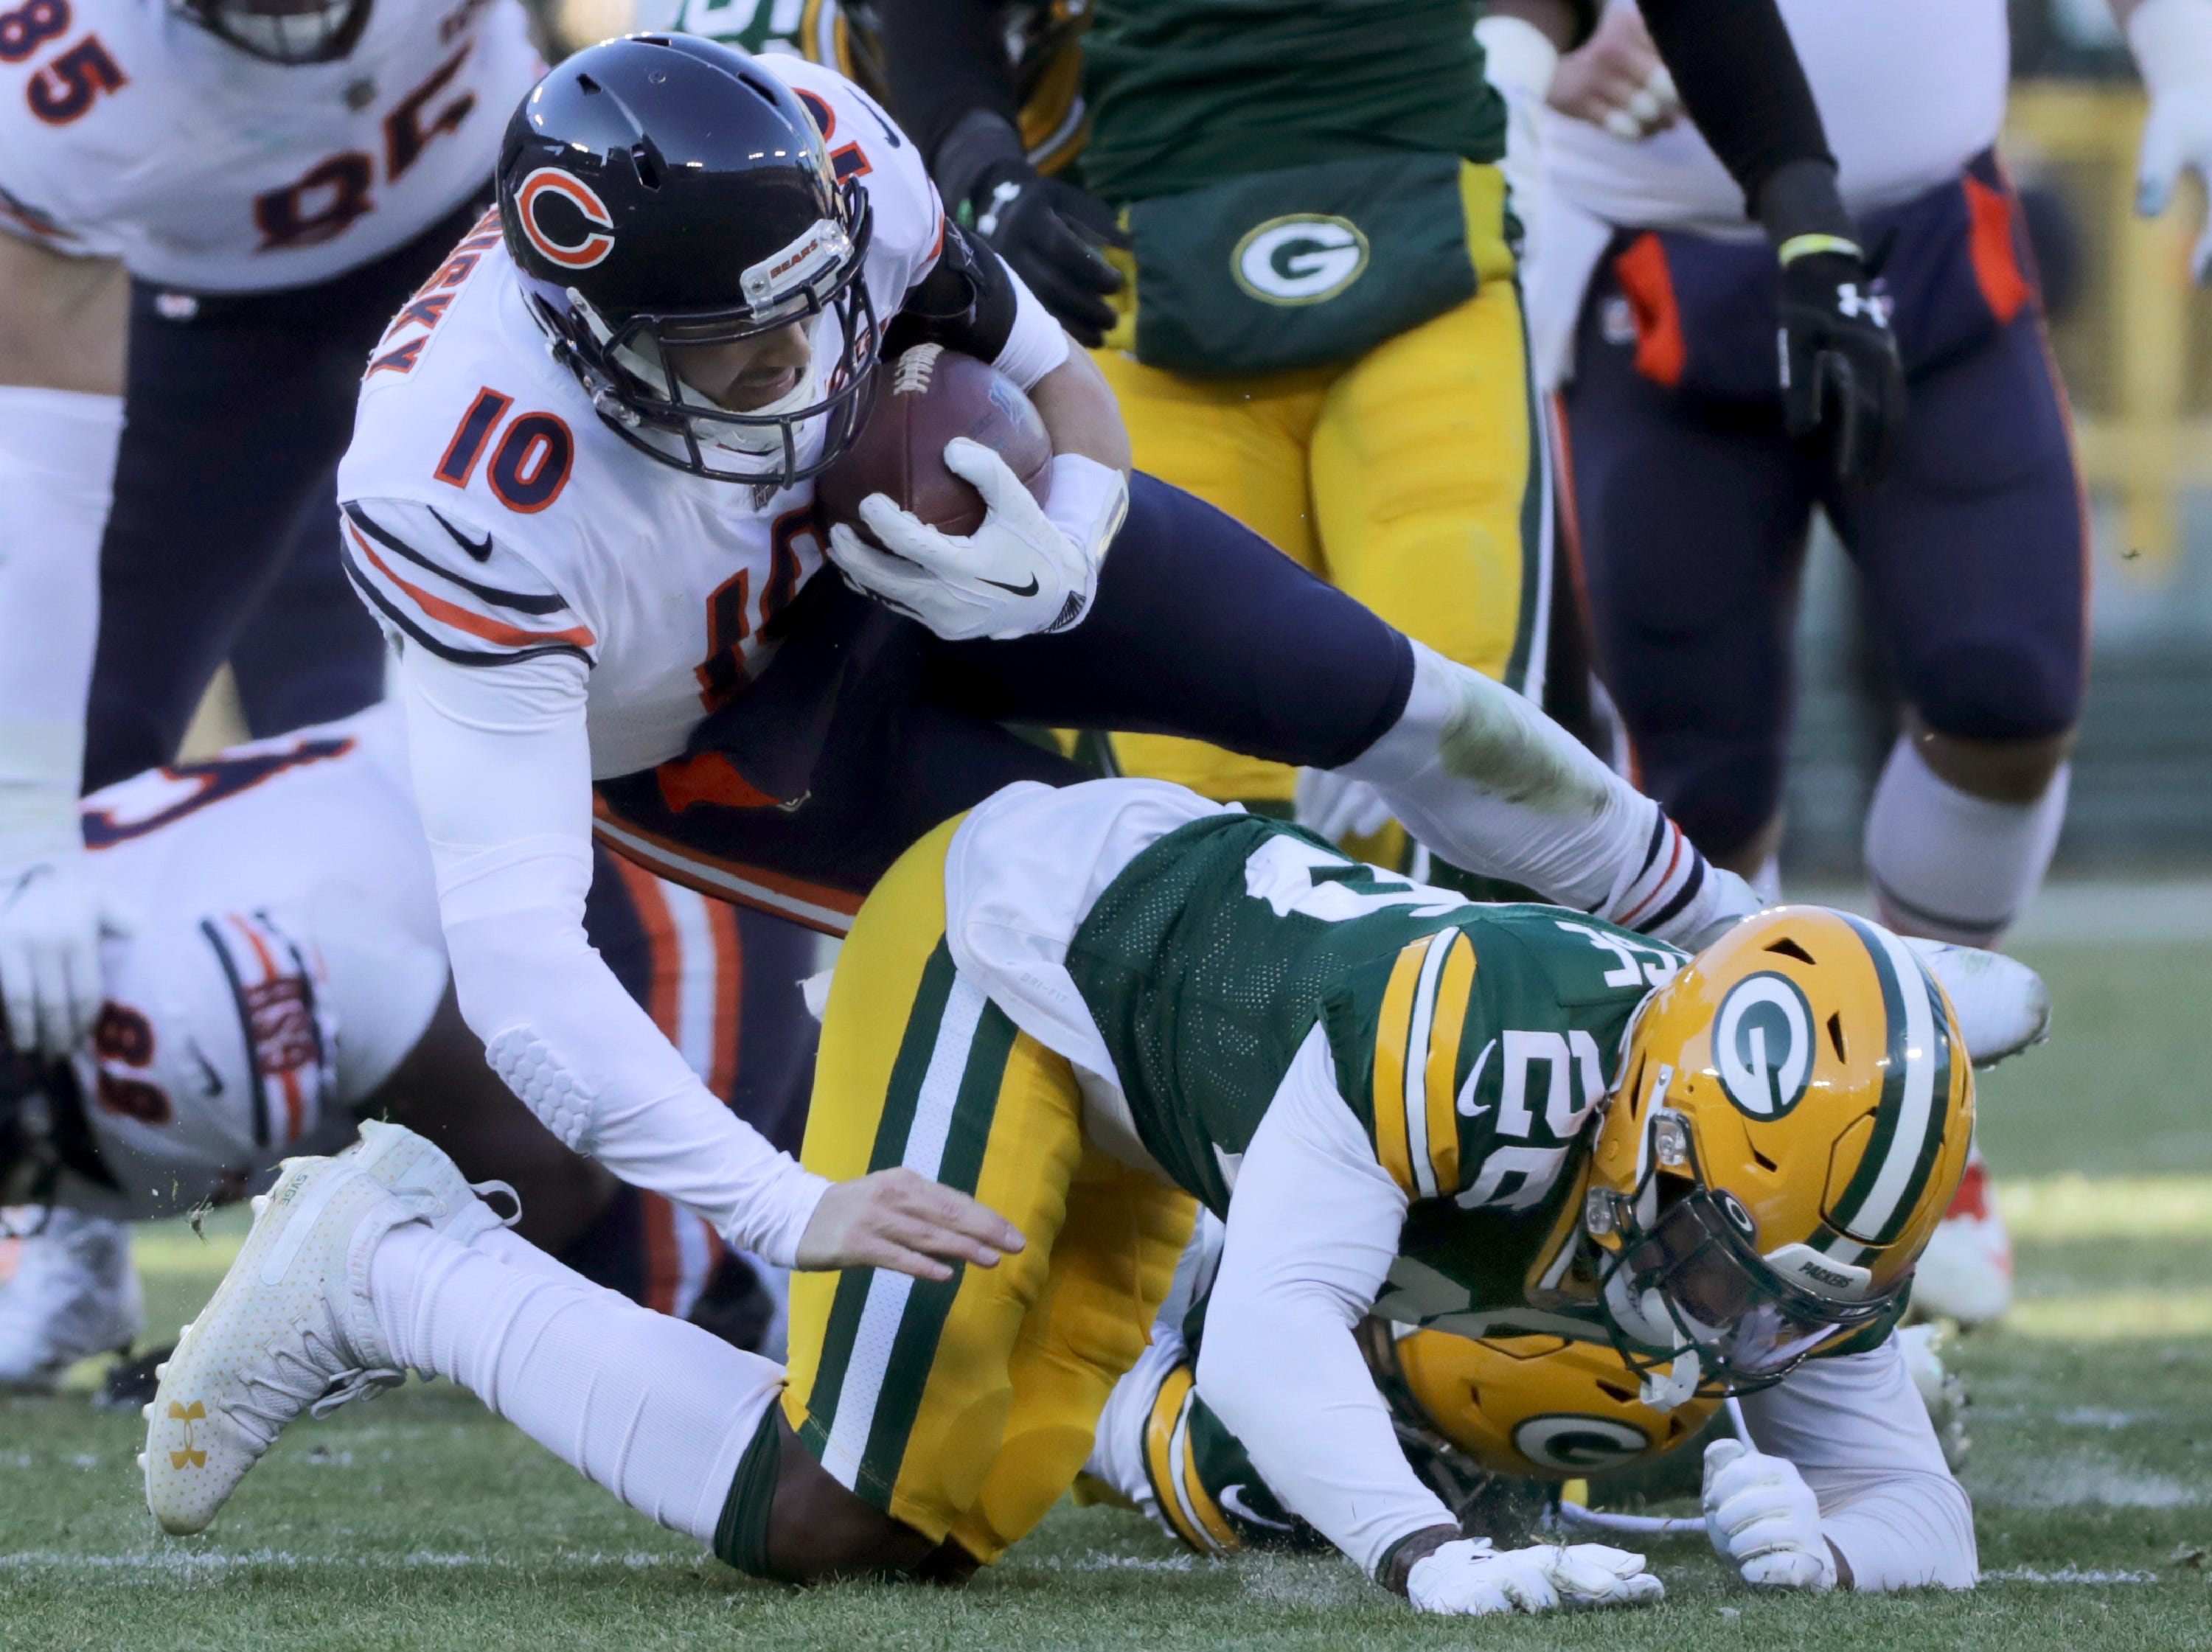 Chicago Bears quarterback Mitchell Trubisky (10) is tackled by Green Bay Packers free safety Darnell Savage (26) during their football game on Sunday, December 15, 2019, at Lambeau Field in Green Bay, Wis.